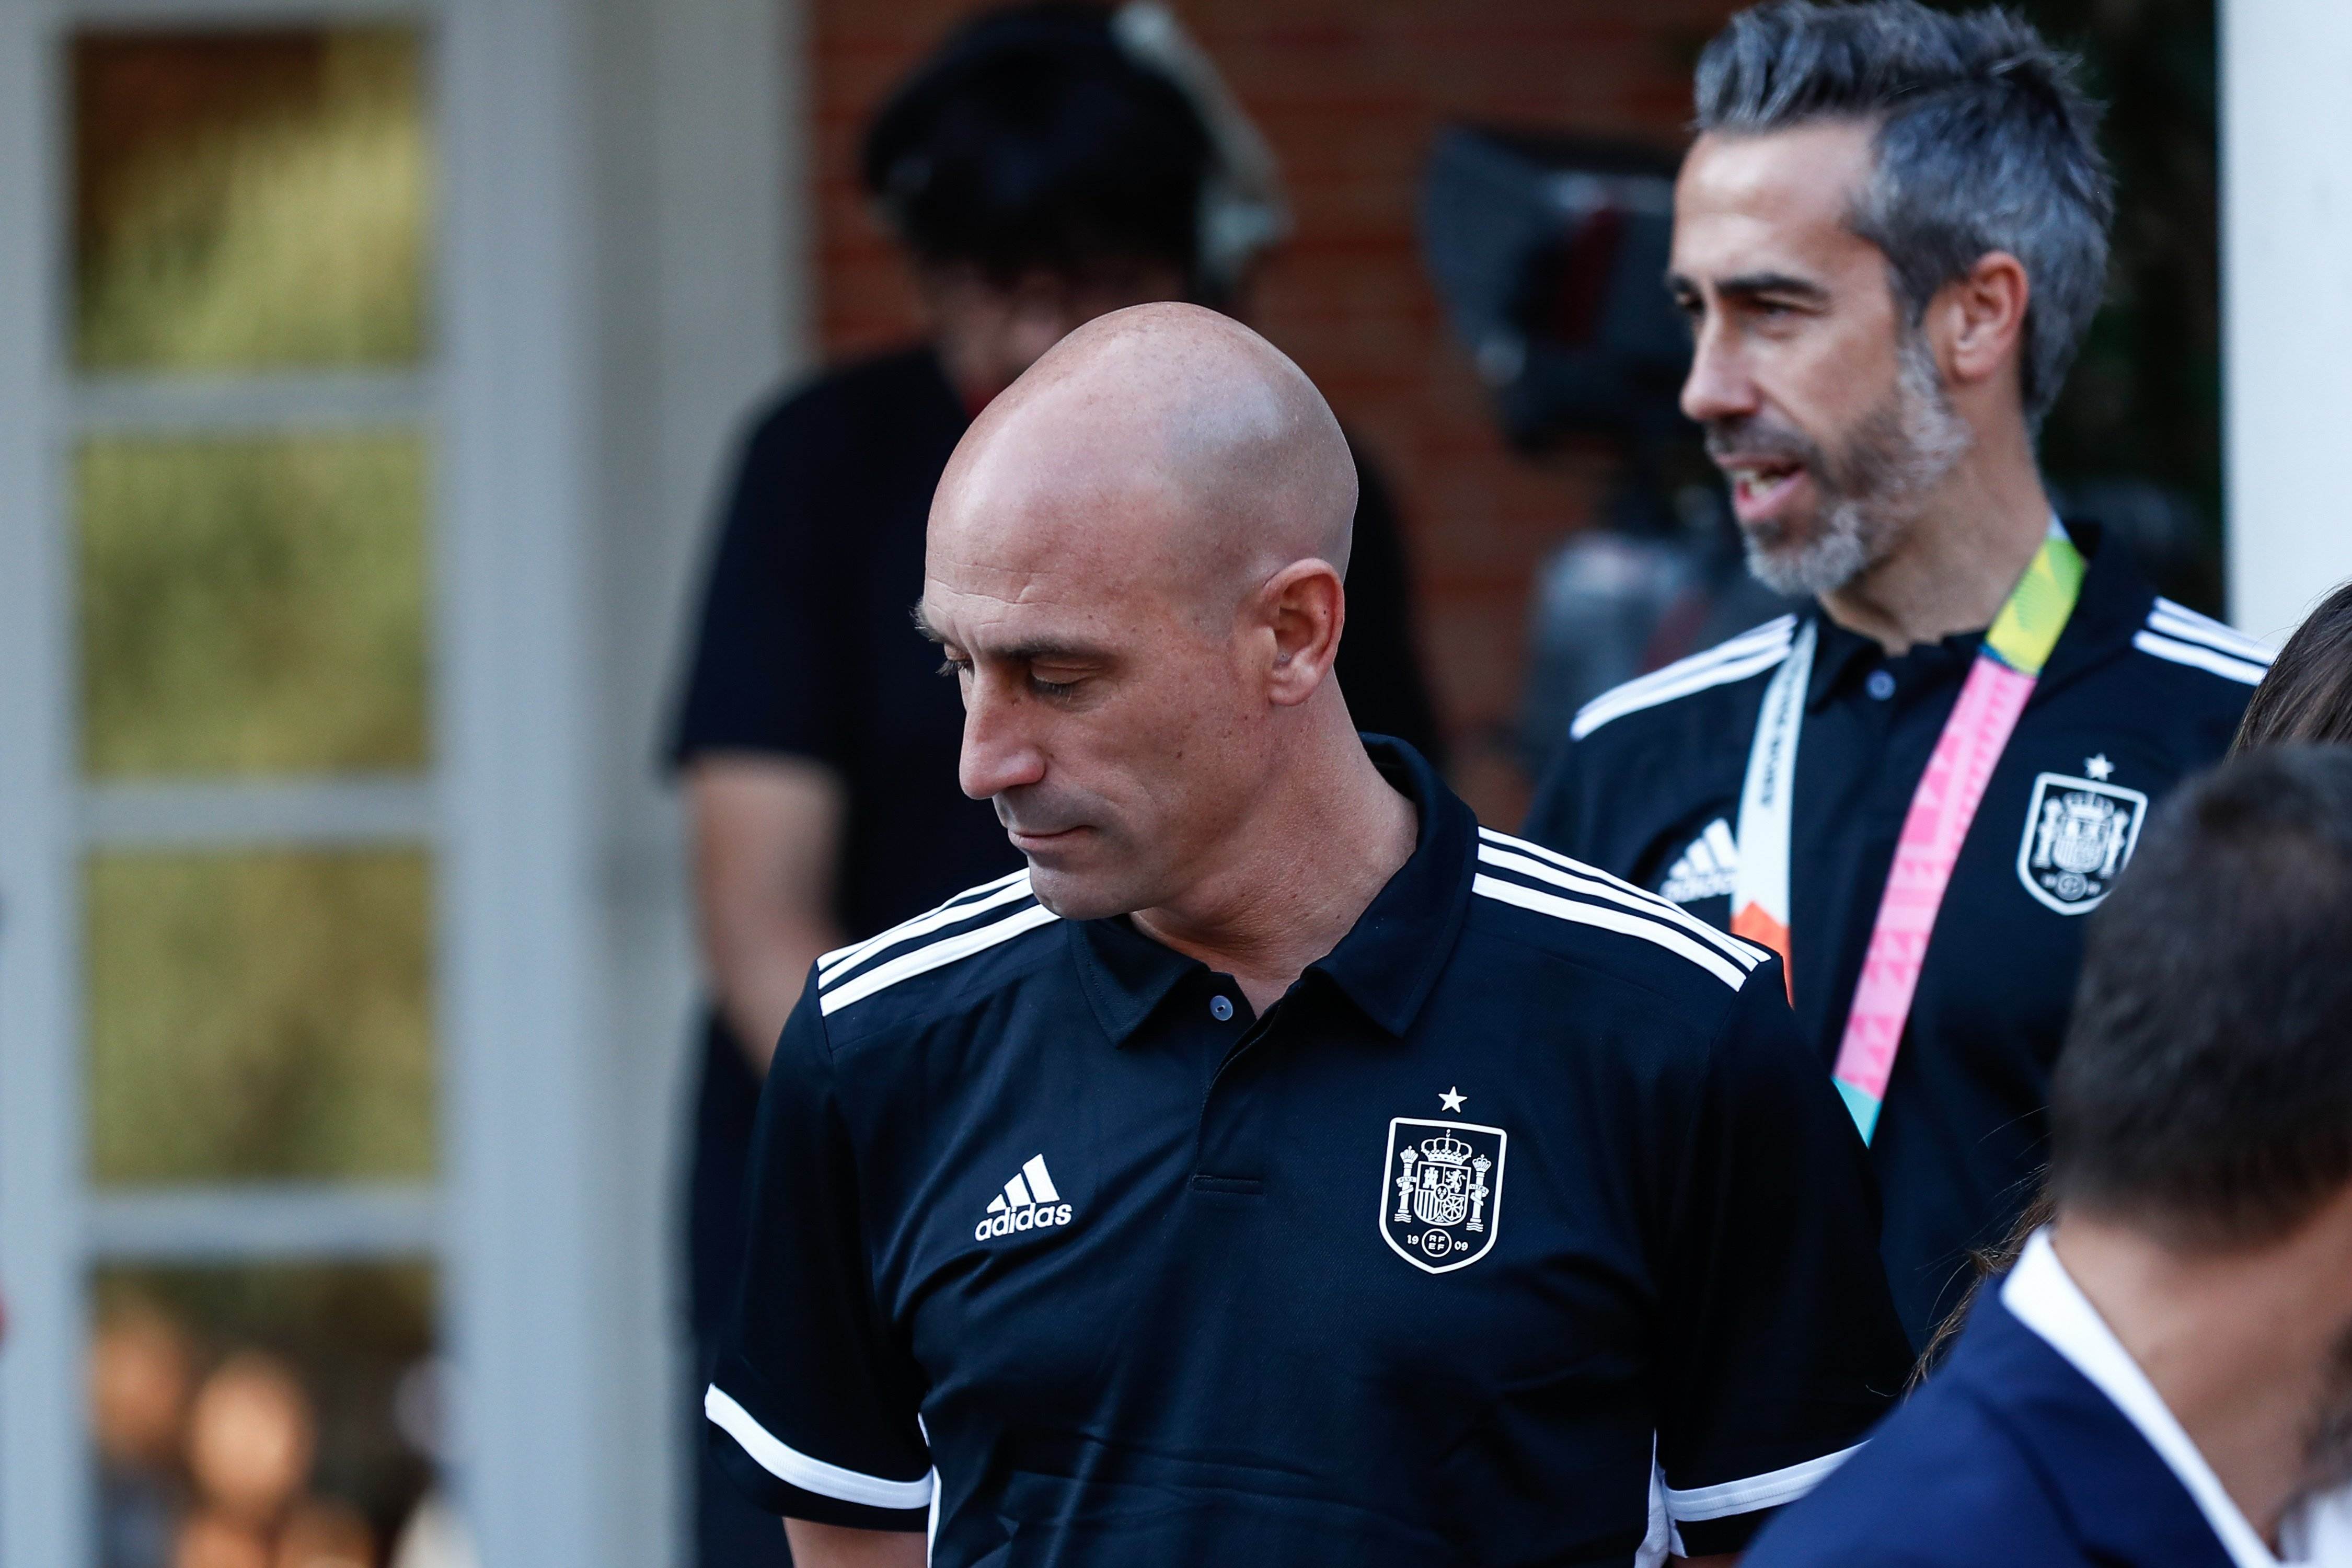 Luis Rubiales is to resign this Friday as president of Spanish football federation